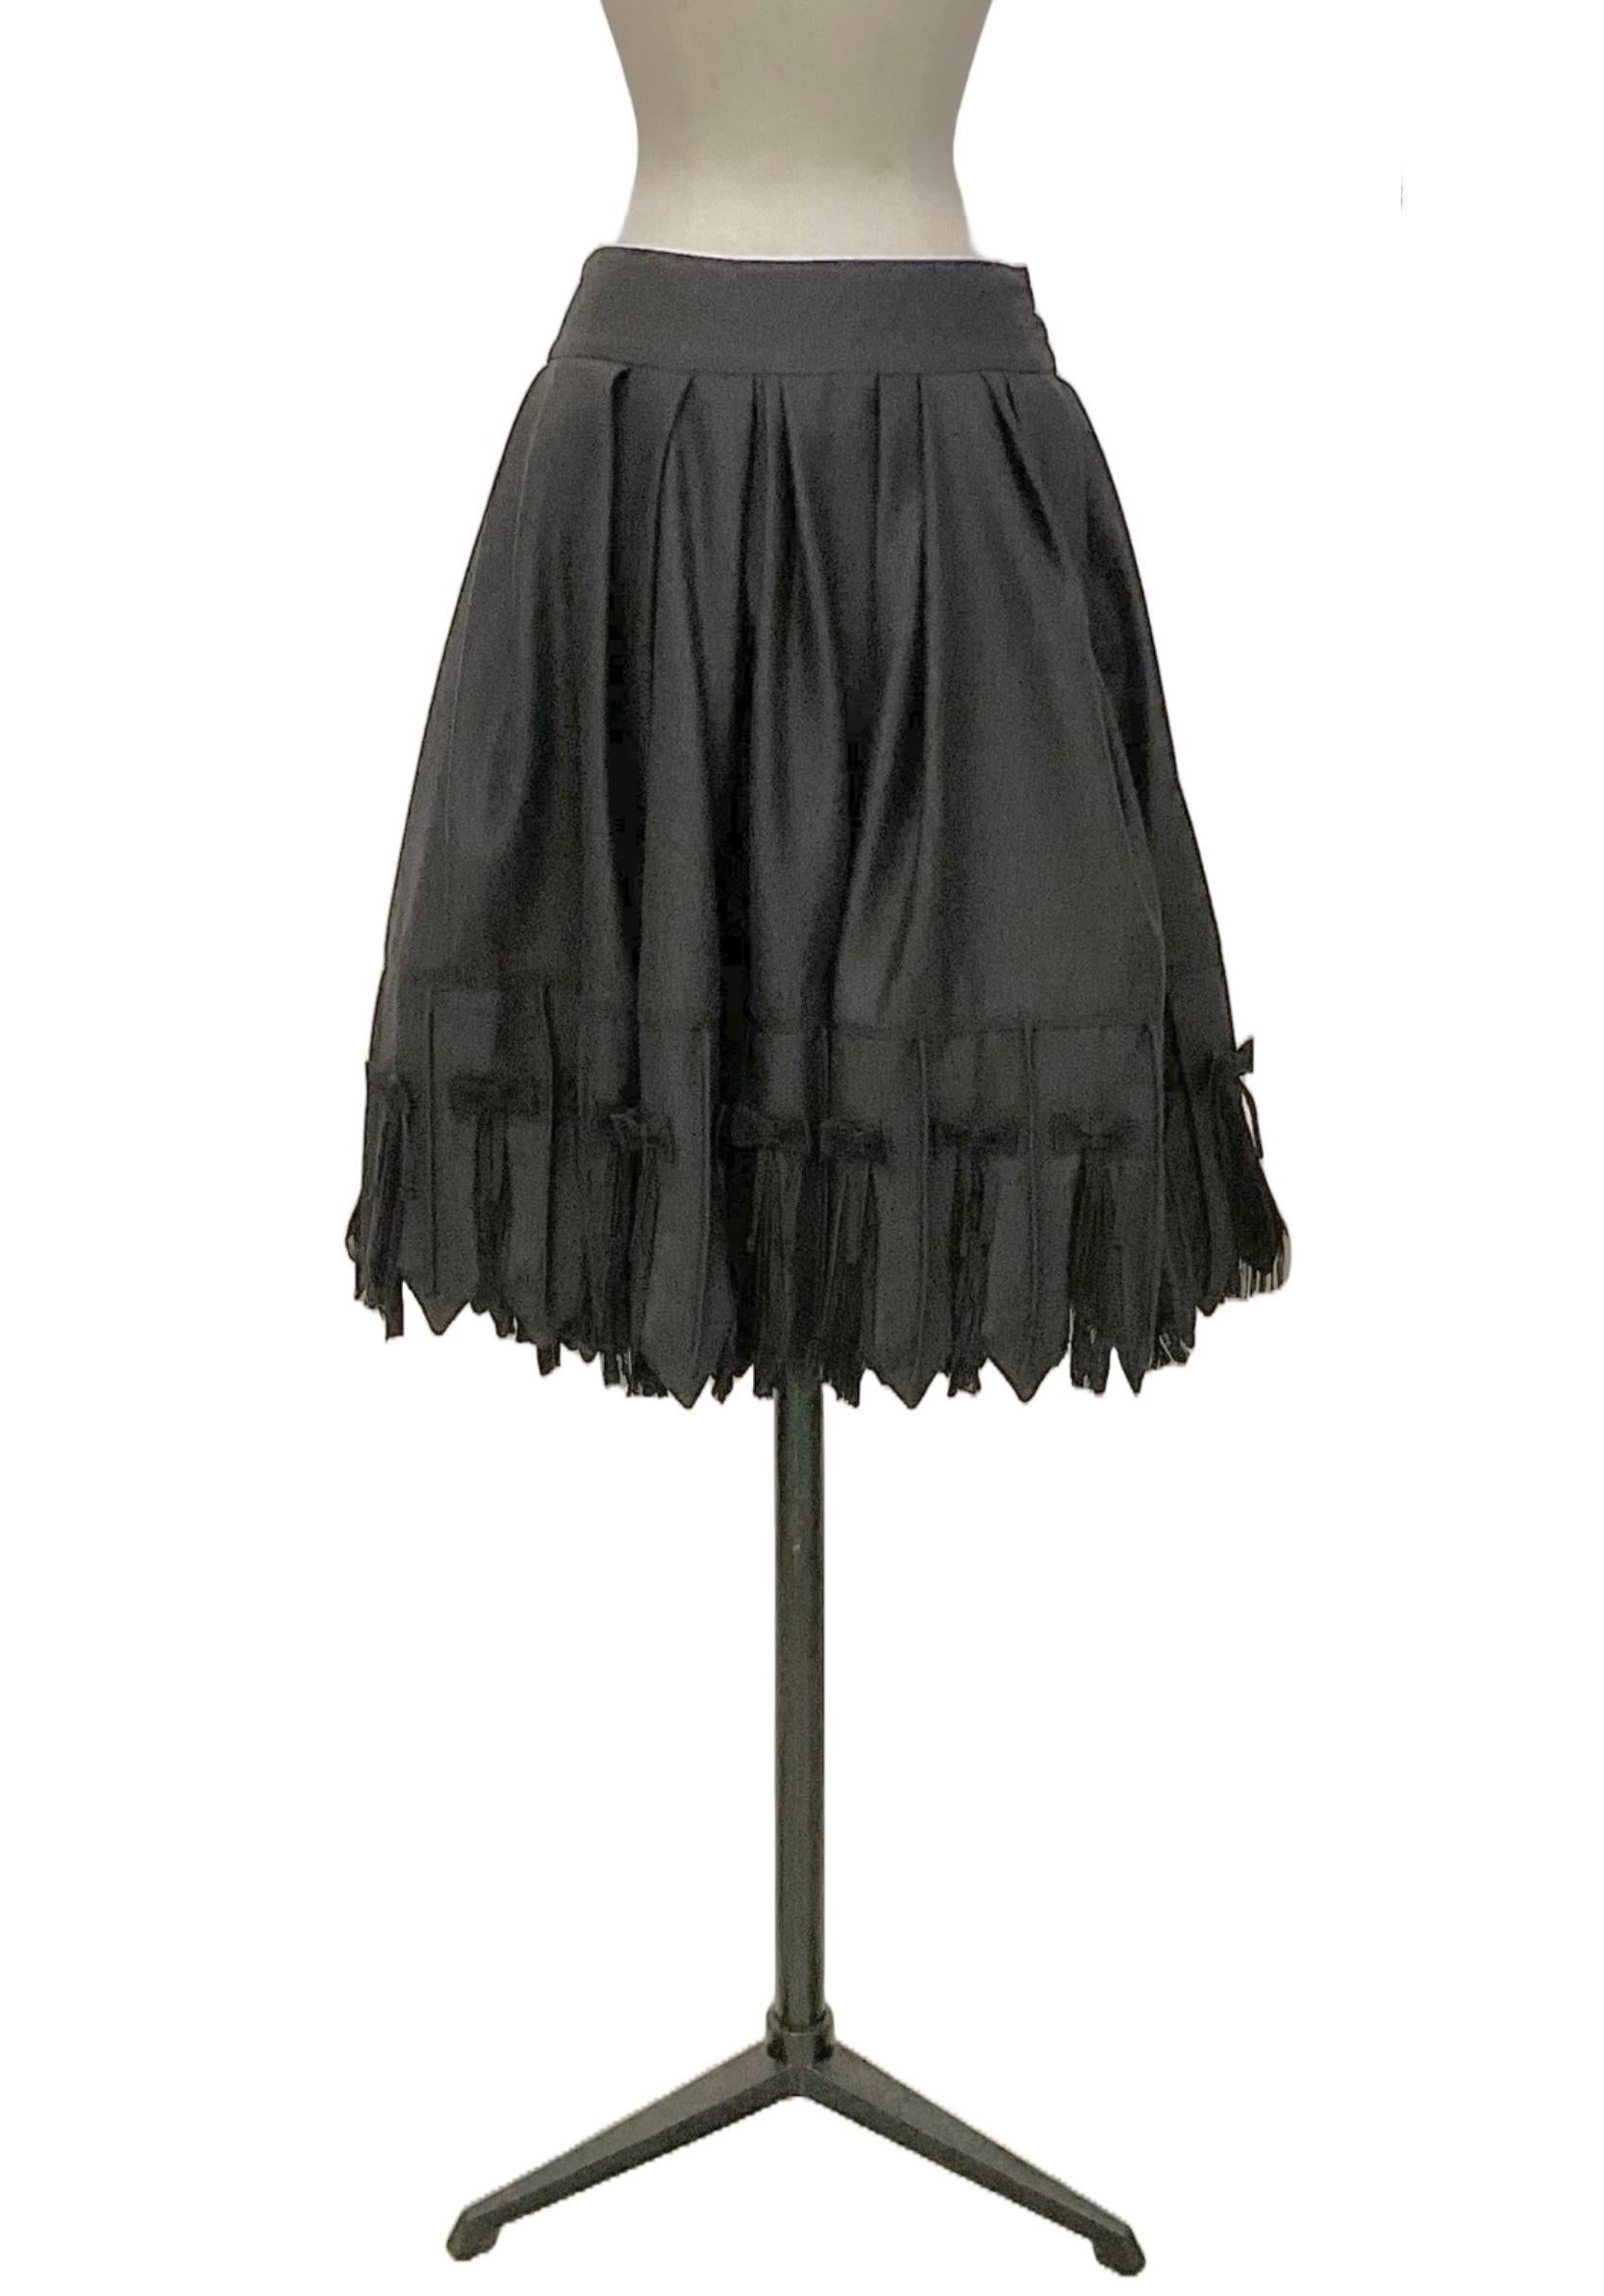 Wide pleated gray flannel skirt from the Ready to
Wear Fall Winter 2010.
Below the basque, on the front side, are two pockets with
flap with decorative flat tablet buttons covered in the same
skirt fabric.
The hem is enlivened by chasing spikes.
The